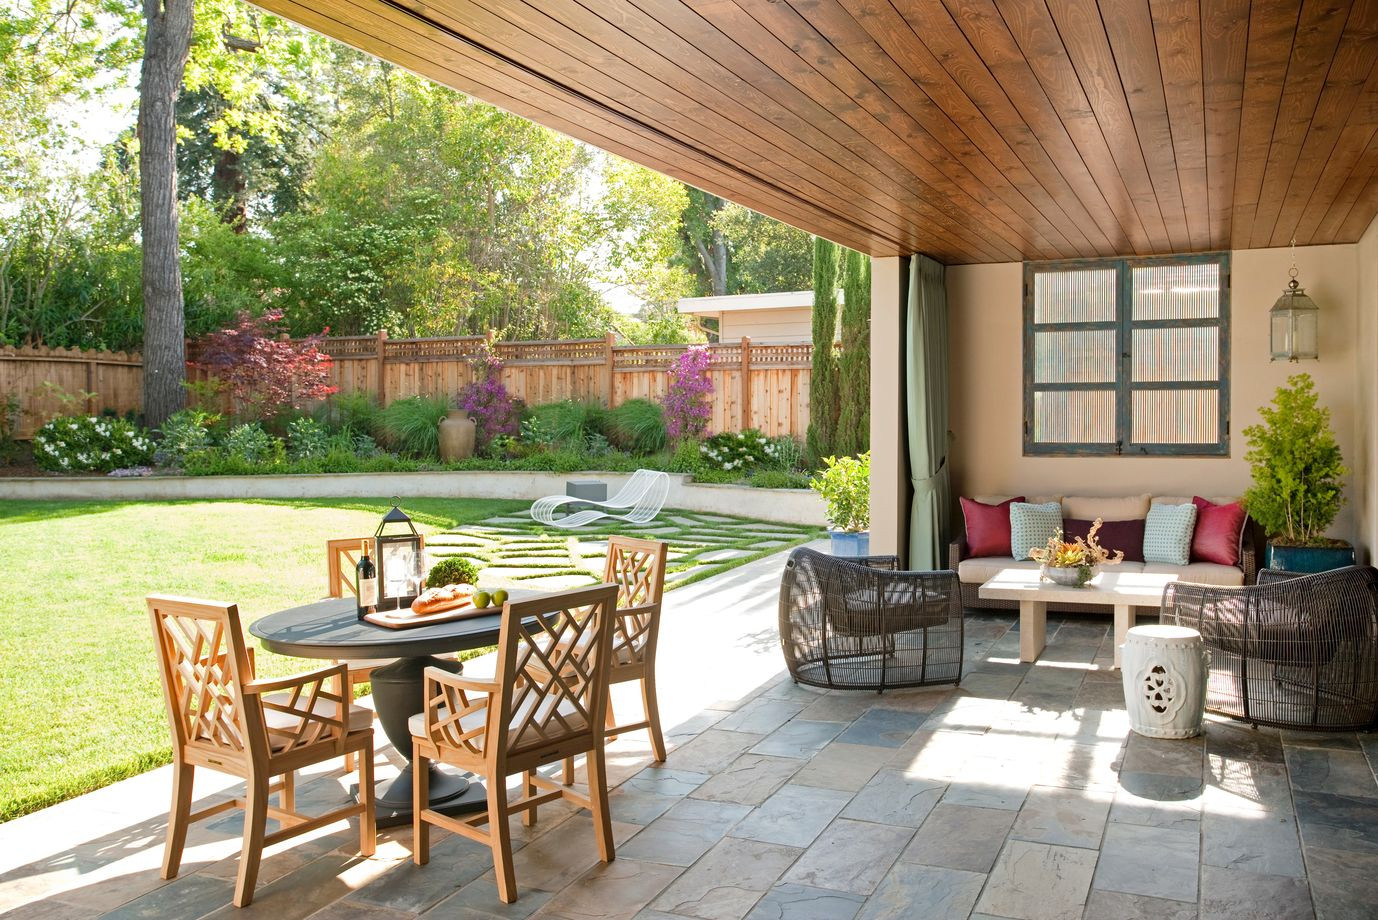 Outdoor Living Space Ideas
 Outdoor Living 8 Ideas To Get The Most Out Your Space